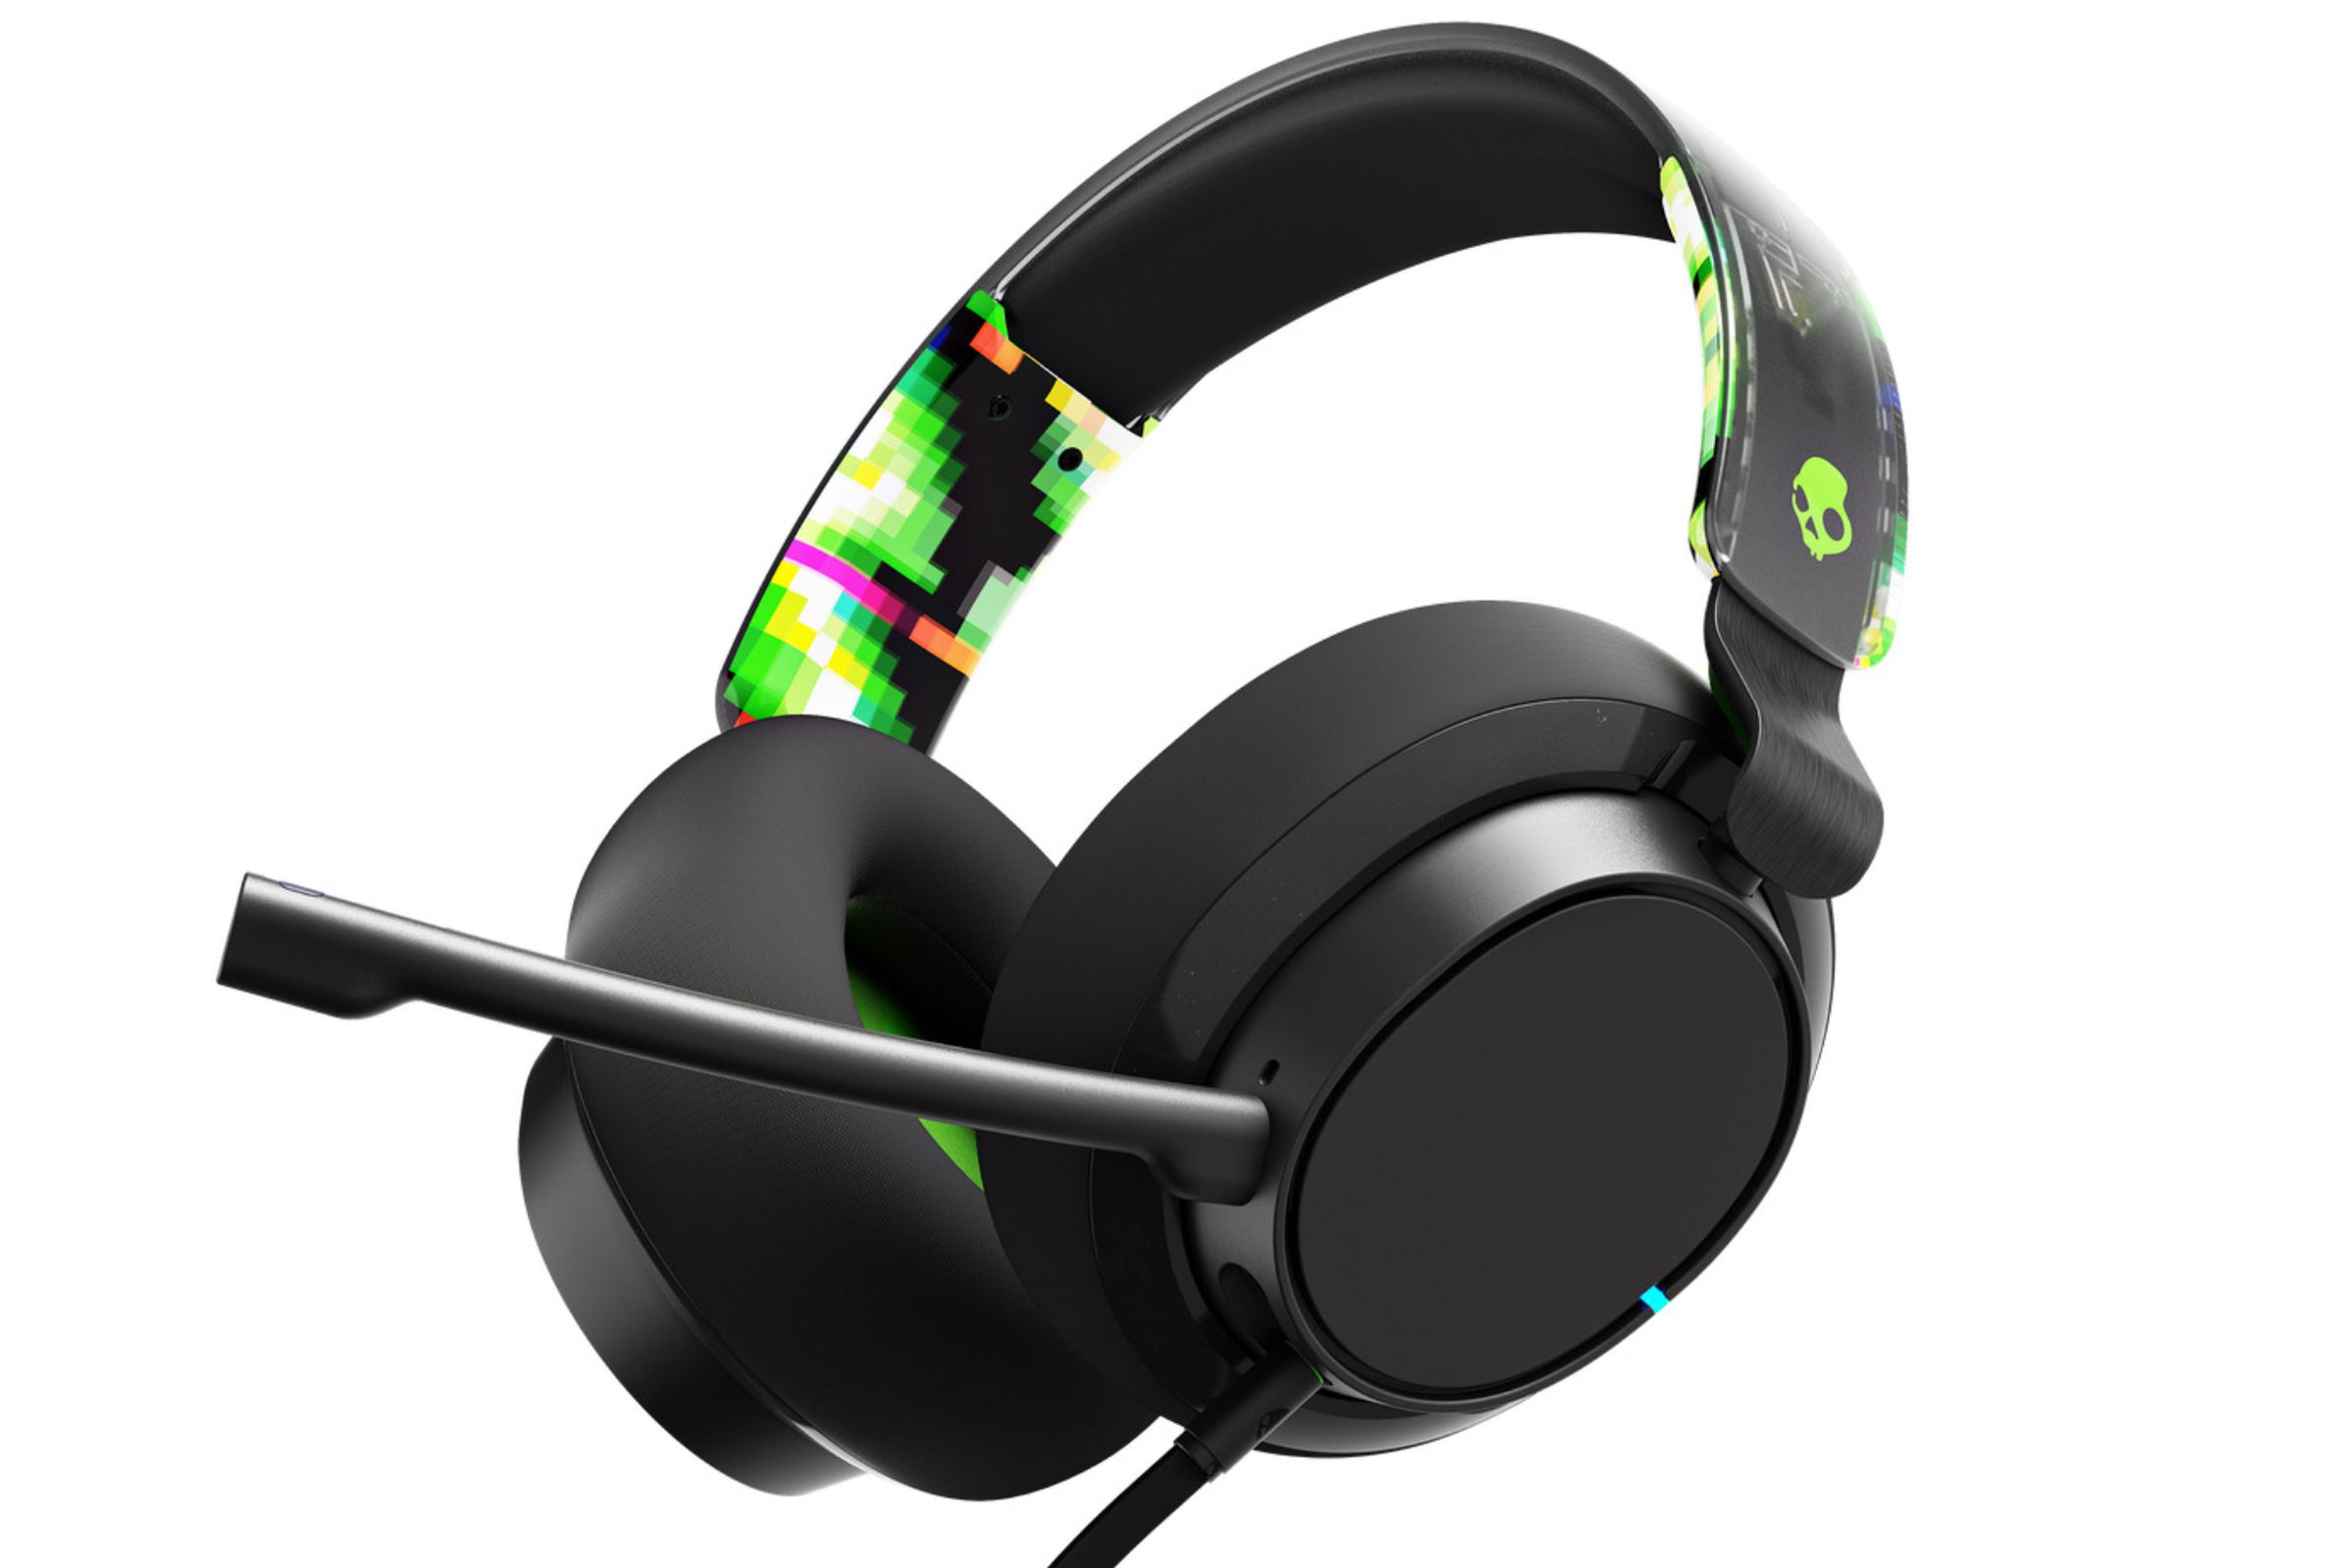 The Skullcandy SLYR Pro gaming headset is shown against a white backdrop. The headset is mostly black, with a few details that are neon green and pink.